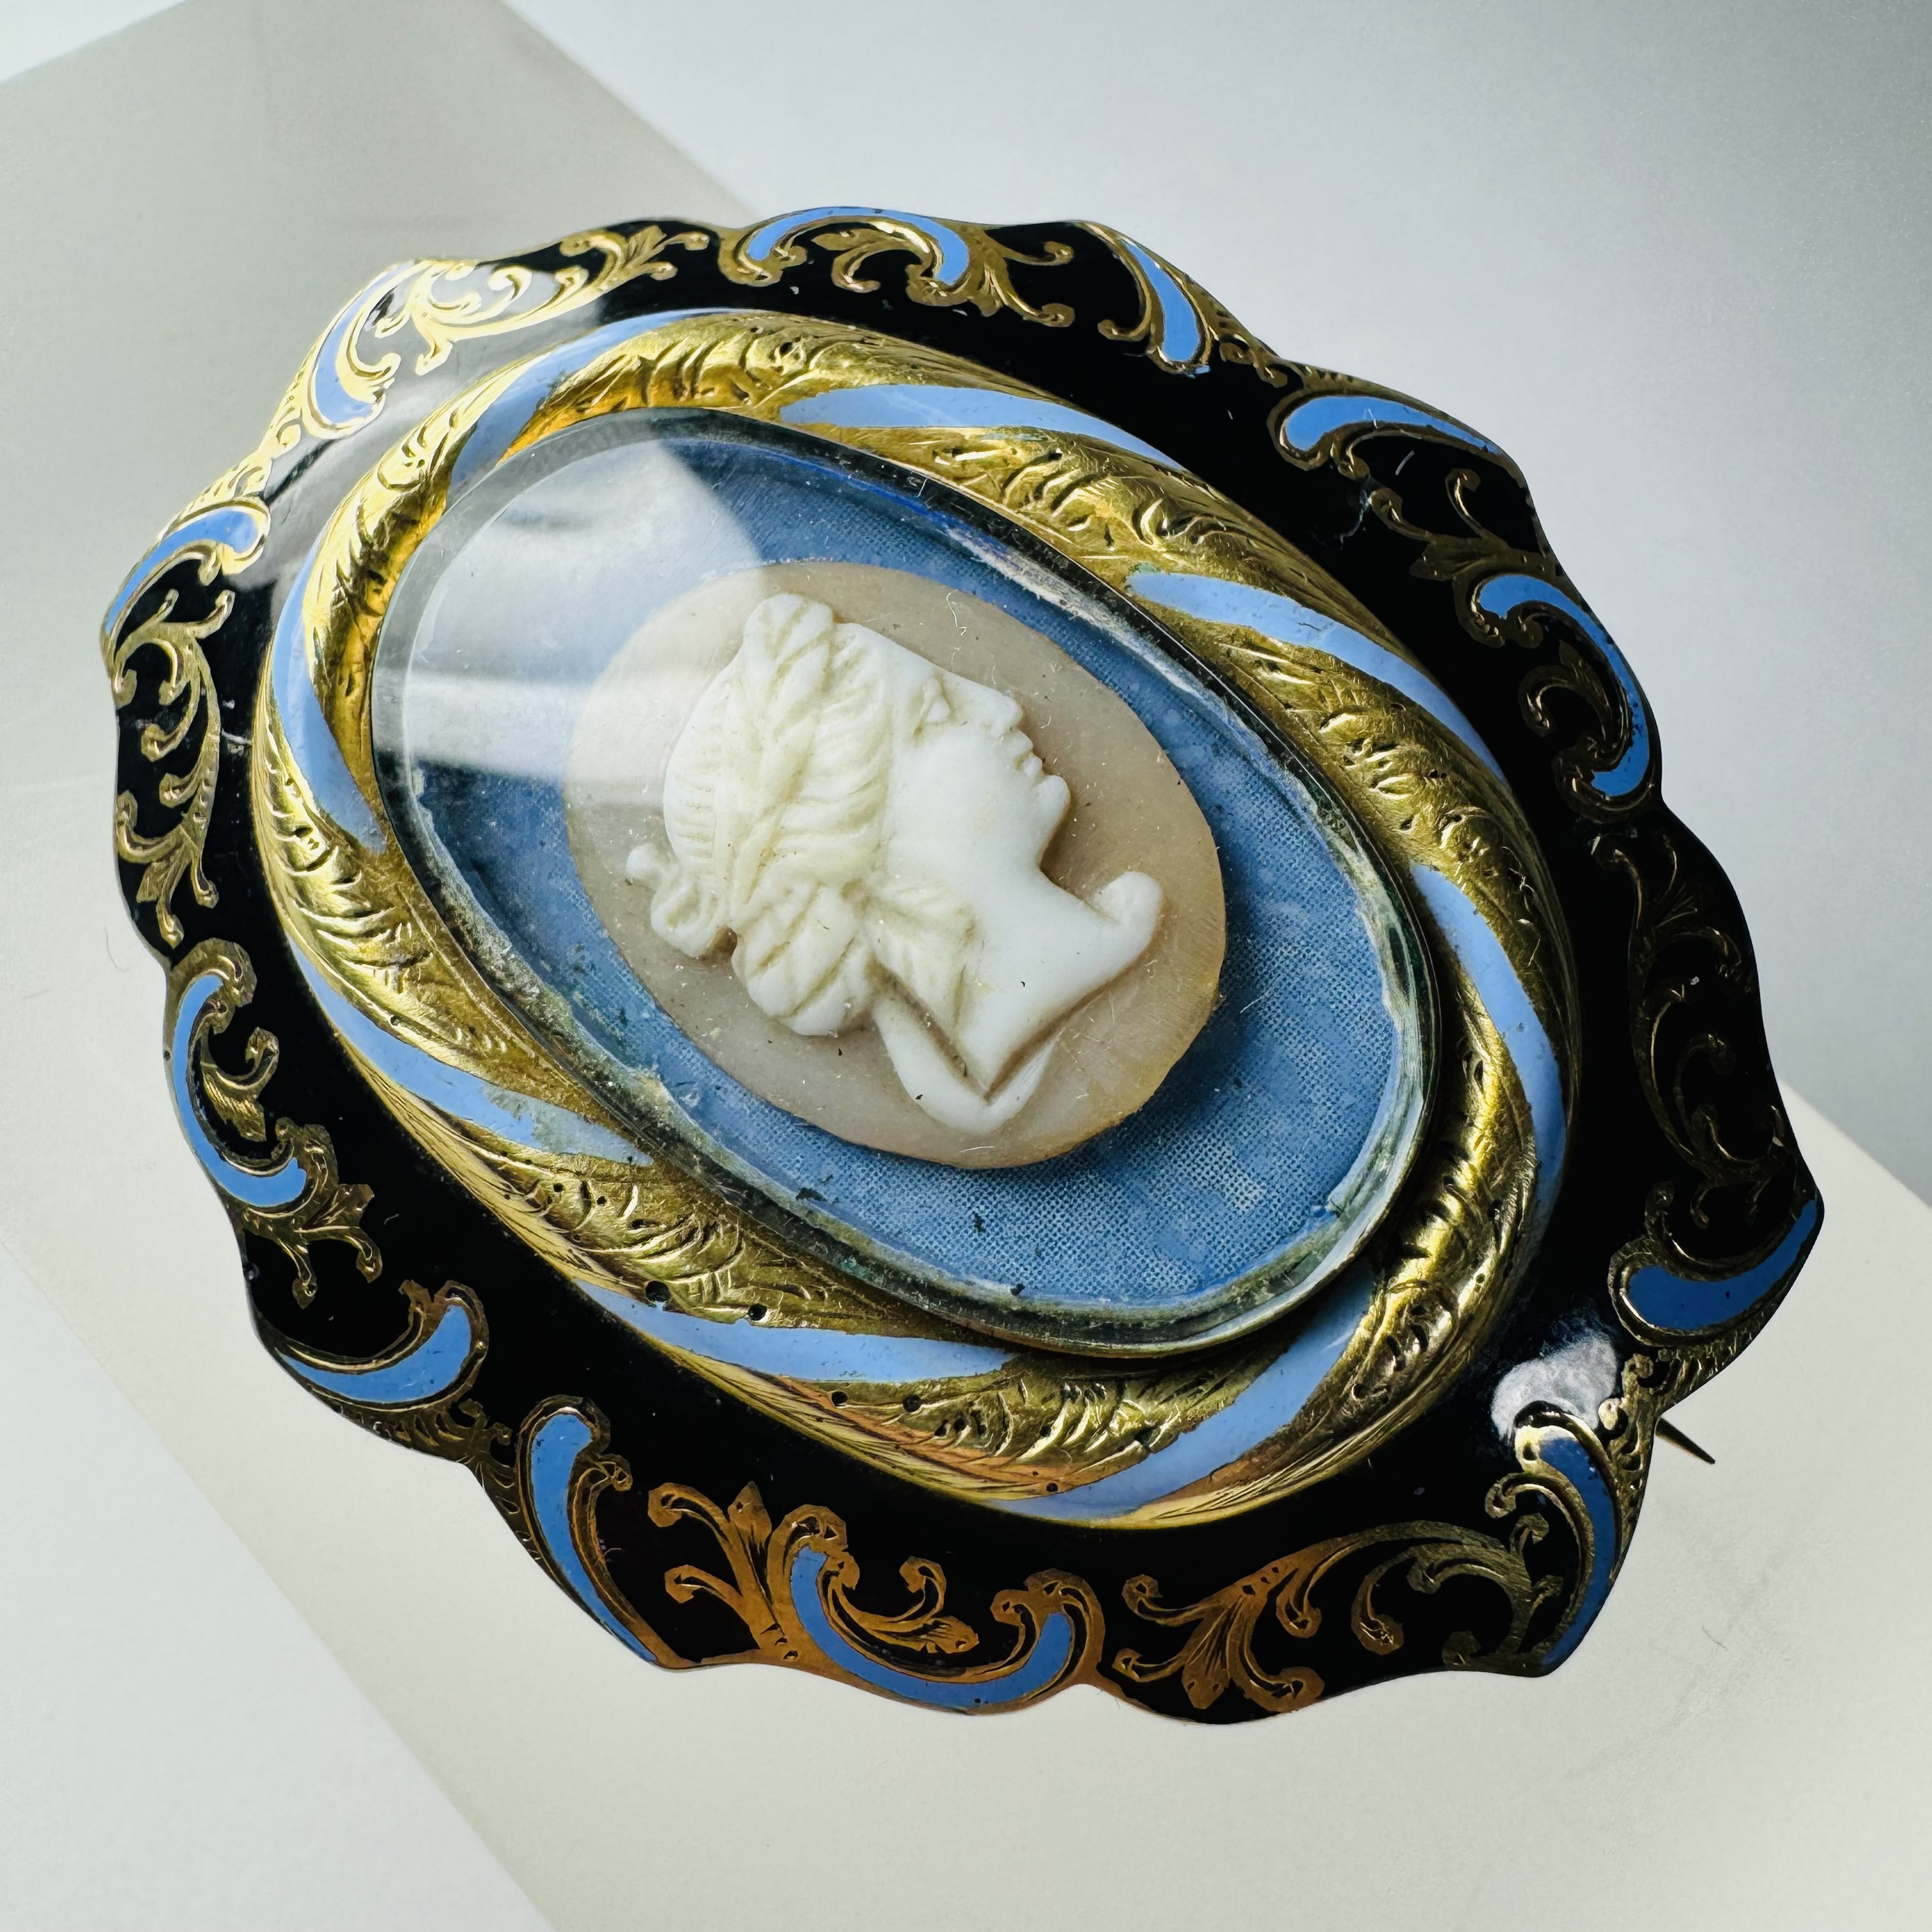 A Victorian enamelled mourning brooch in blue and black enamel. Engraved "In memory William